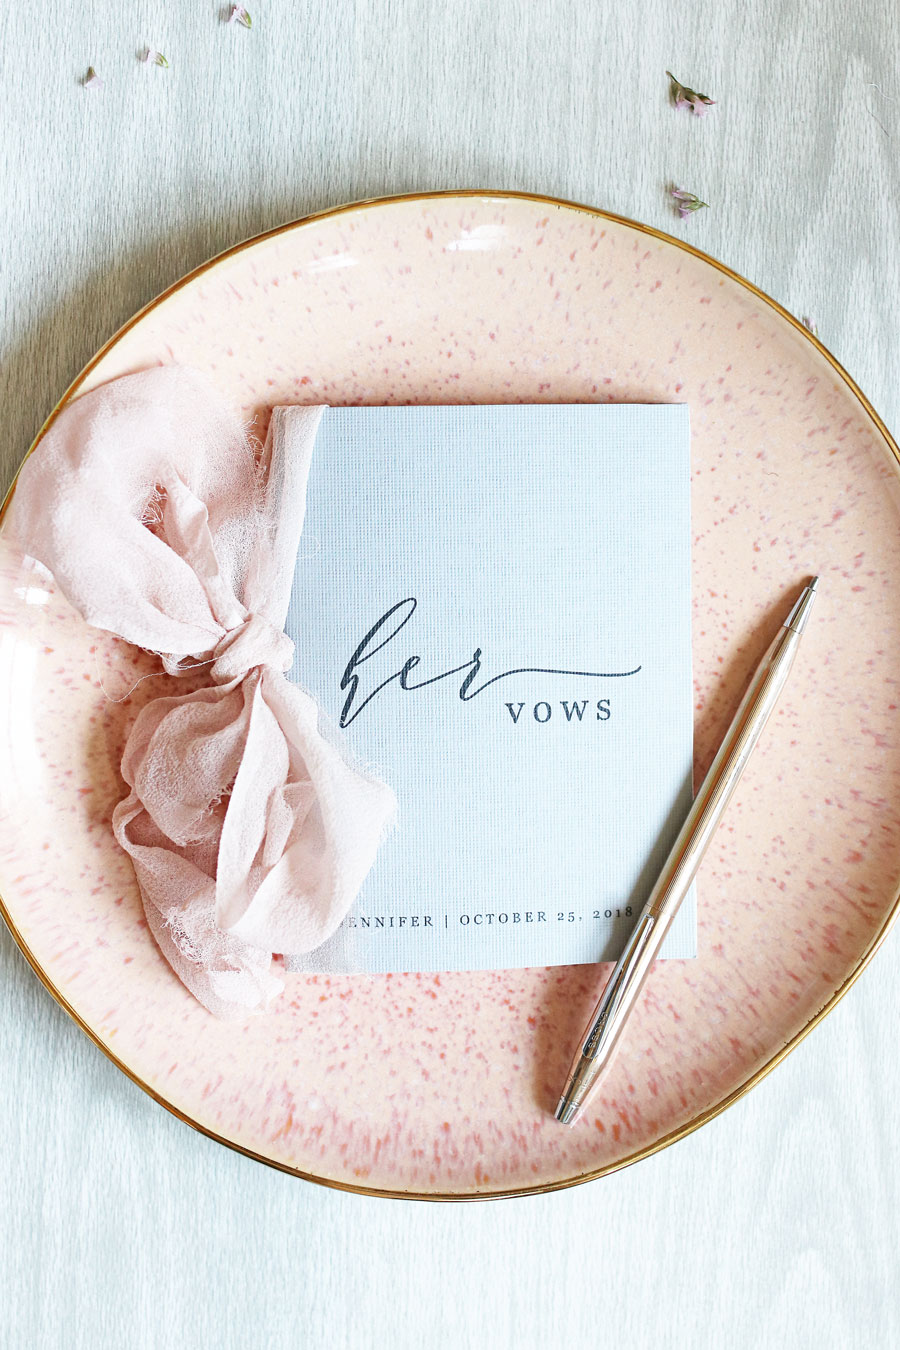 Looking for ways to make your wedding ceremony more special? Make these dreamy diy vow books to record your vows and cherish them for years to come.